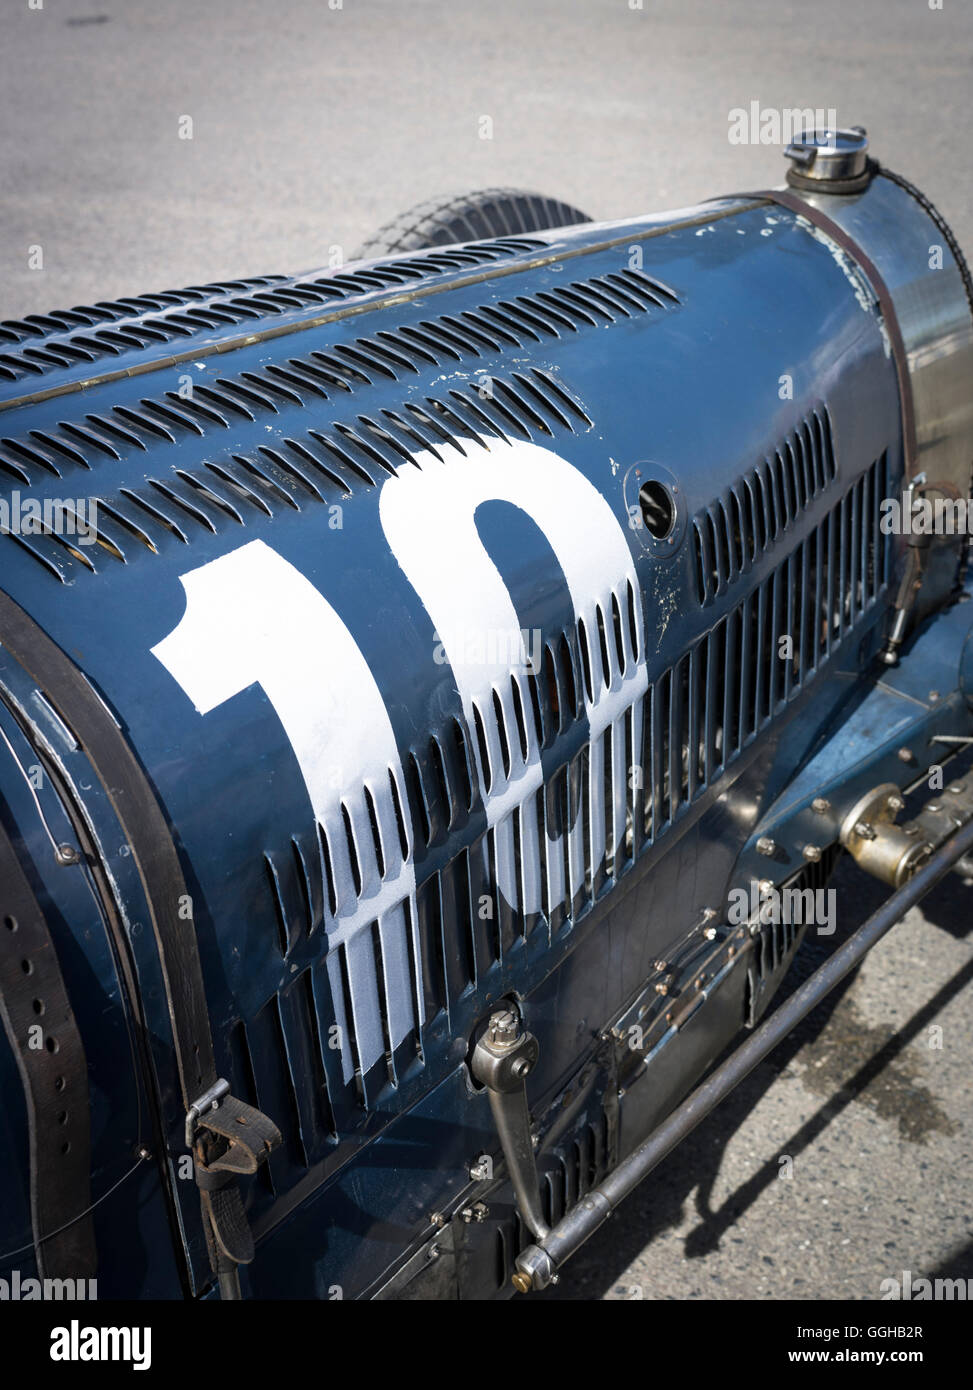 Bugatti engine bonnet, Grover-Williams Trophy, 72nd Members Meeting, racing, car racing, classic car, Chichester, Sussex, United Stock Photo